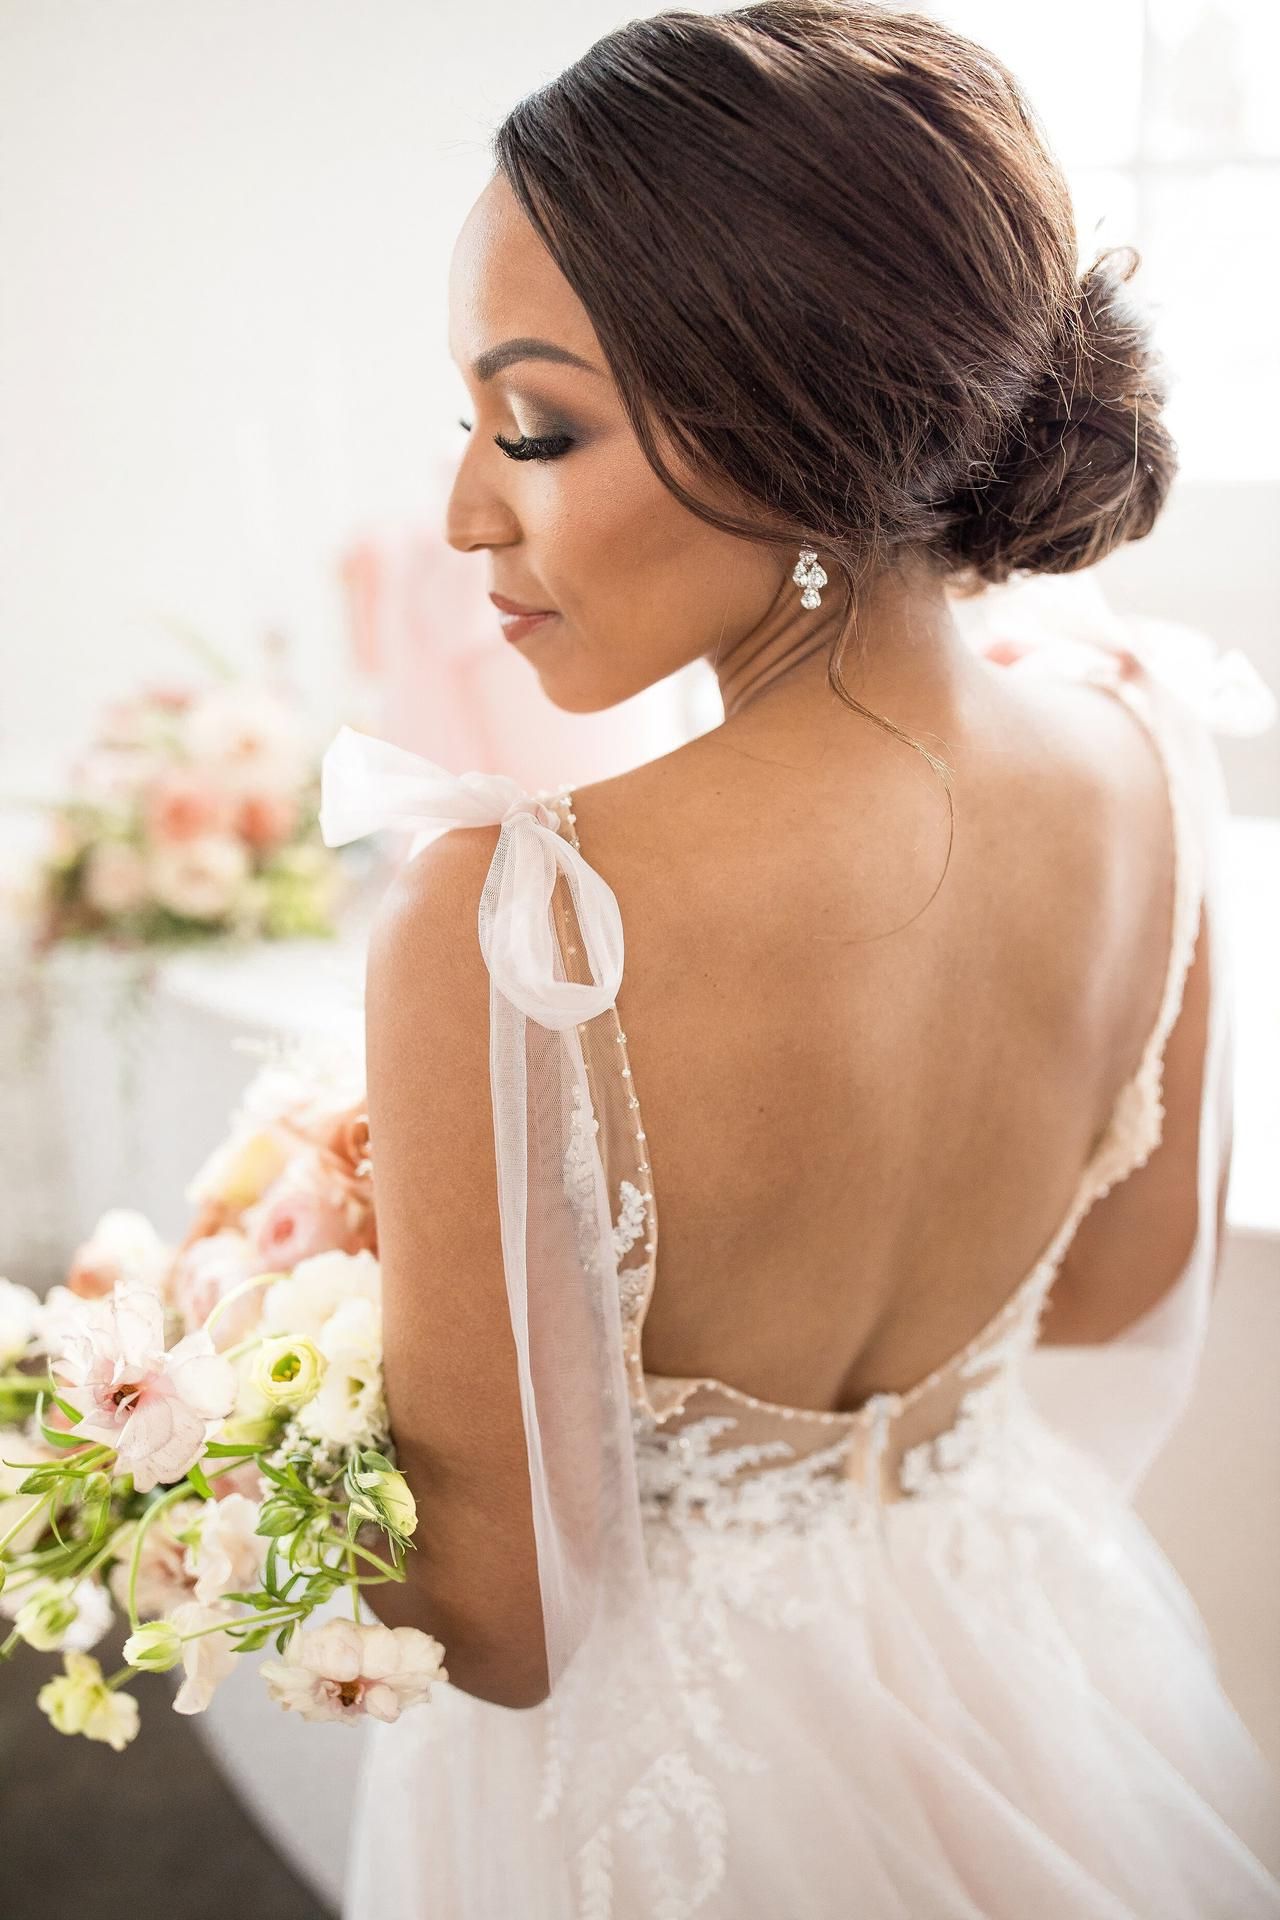 40 Wedding Hairstyles For Long Hair: Bridal Updos, Veils & More Pertaining To Most Current Low Flower Bun For Long Hair (View 13 of 15)